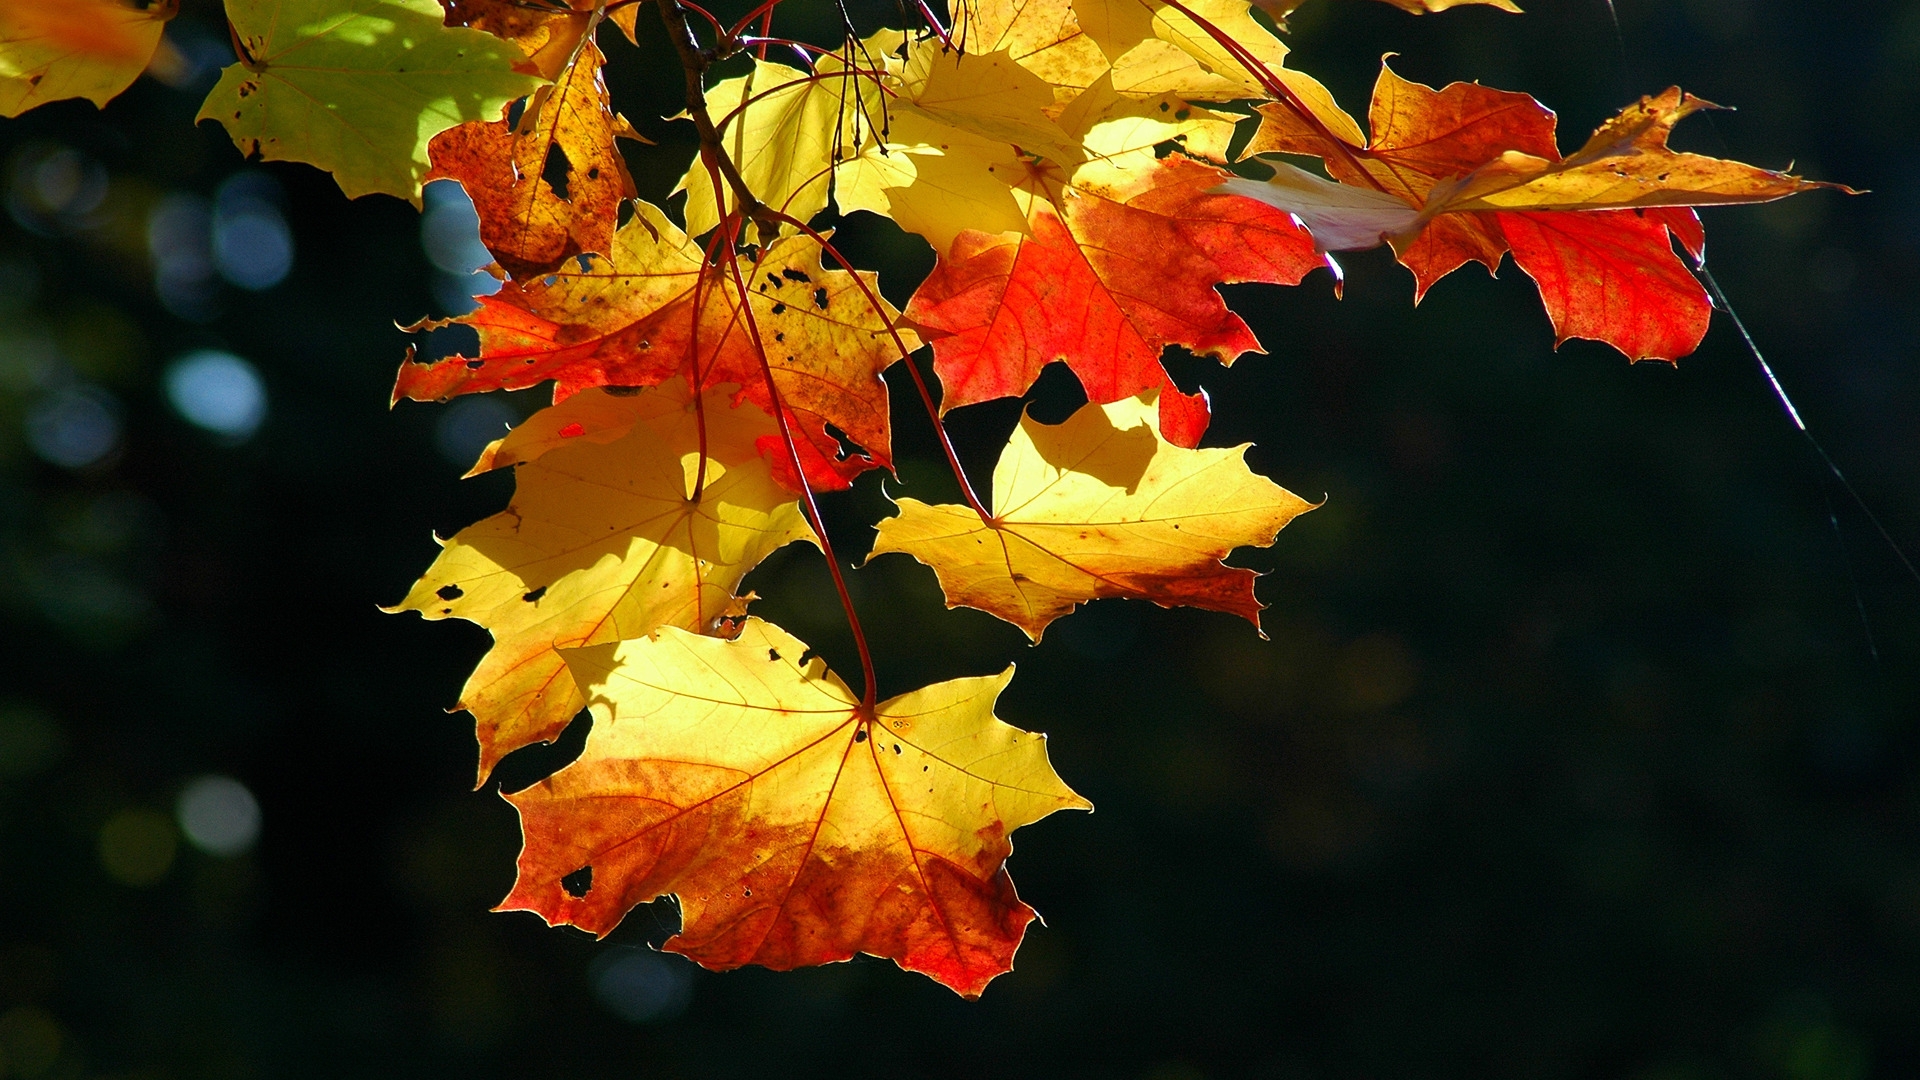 Colorful autumn leaves   High Definition Wallpapers   HD wallpapers